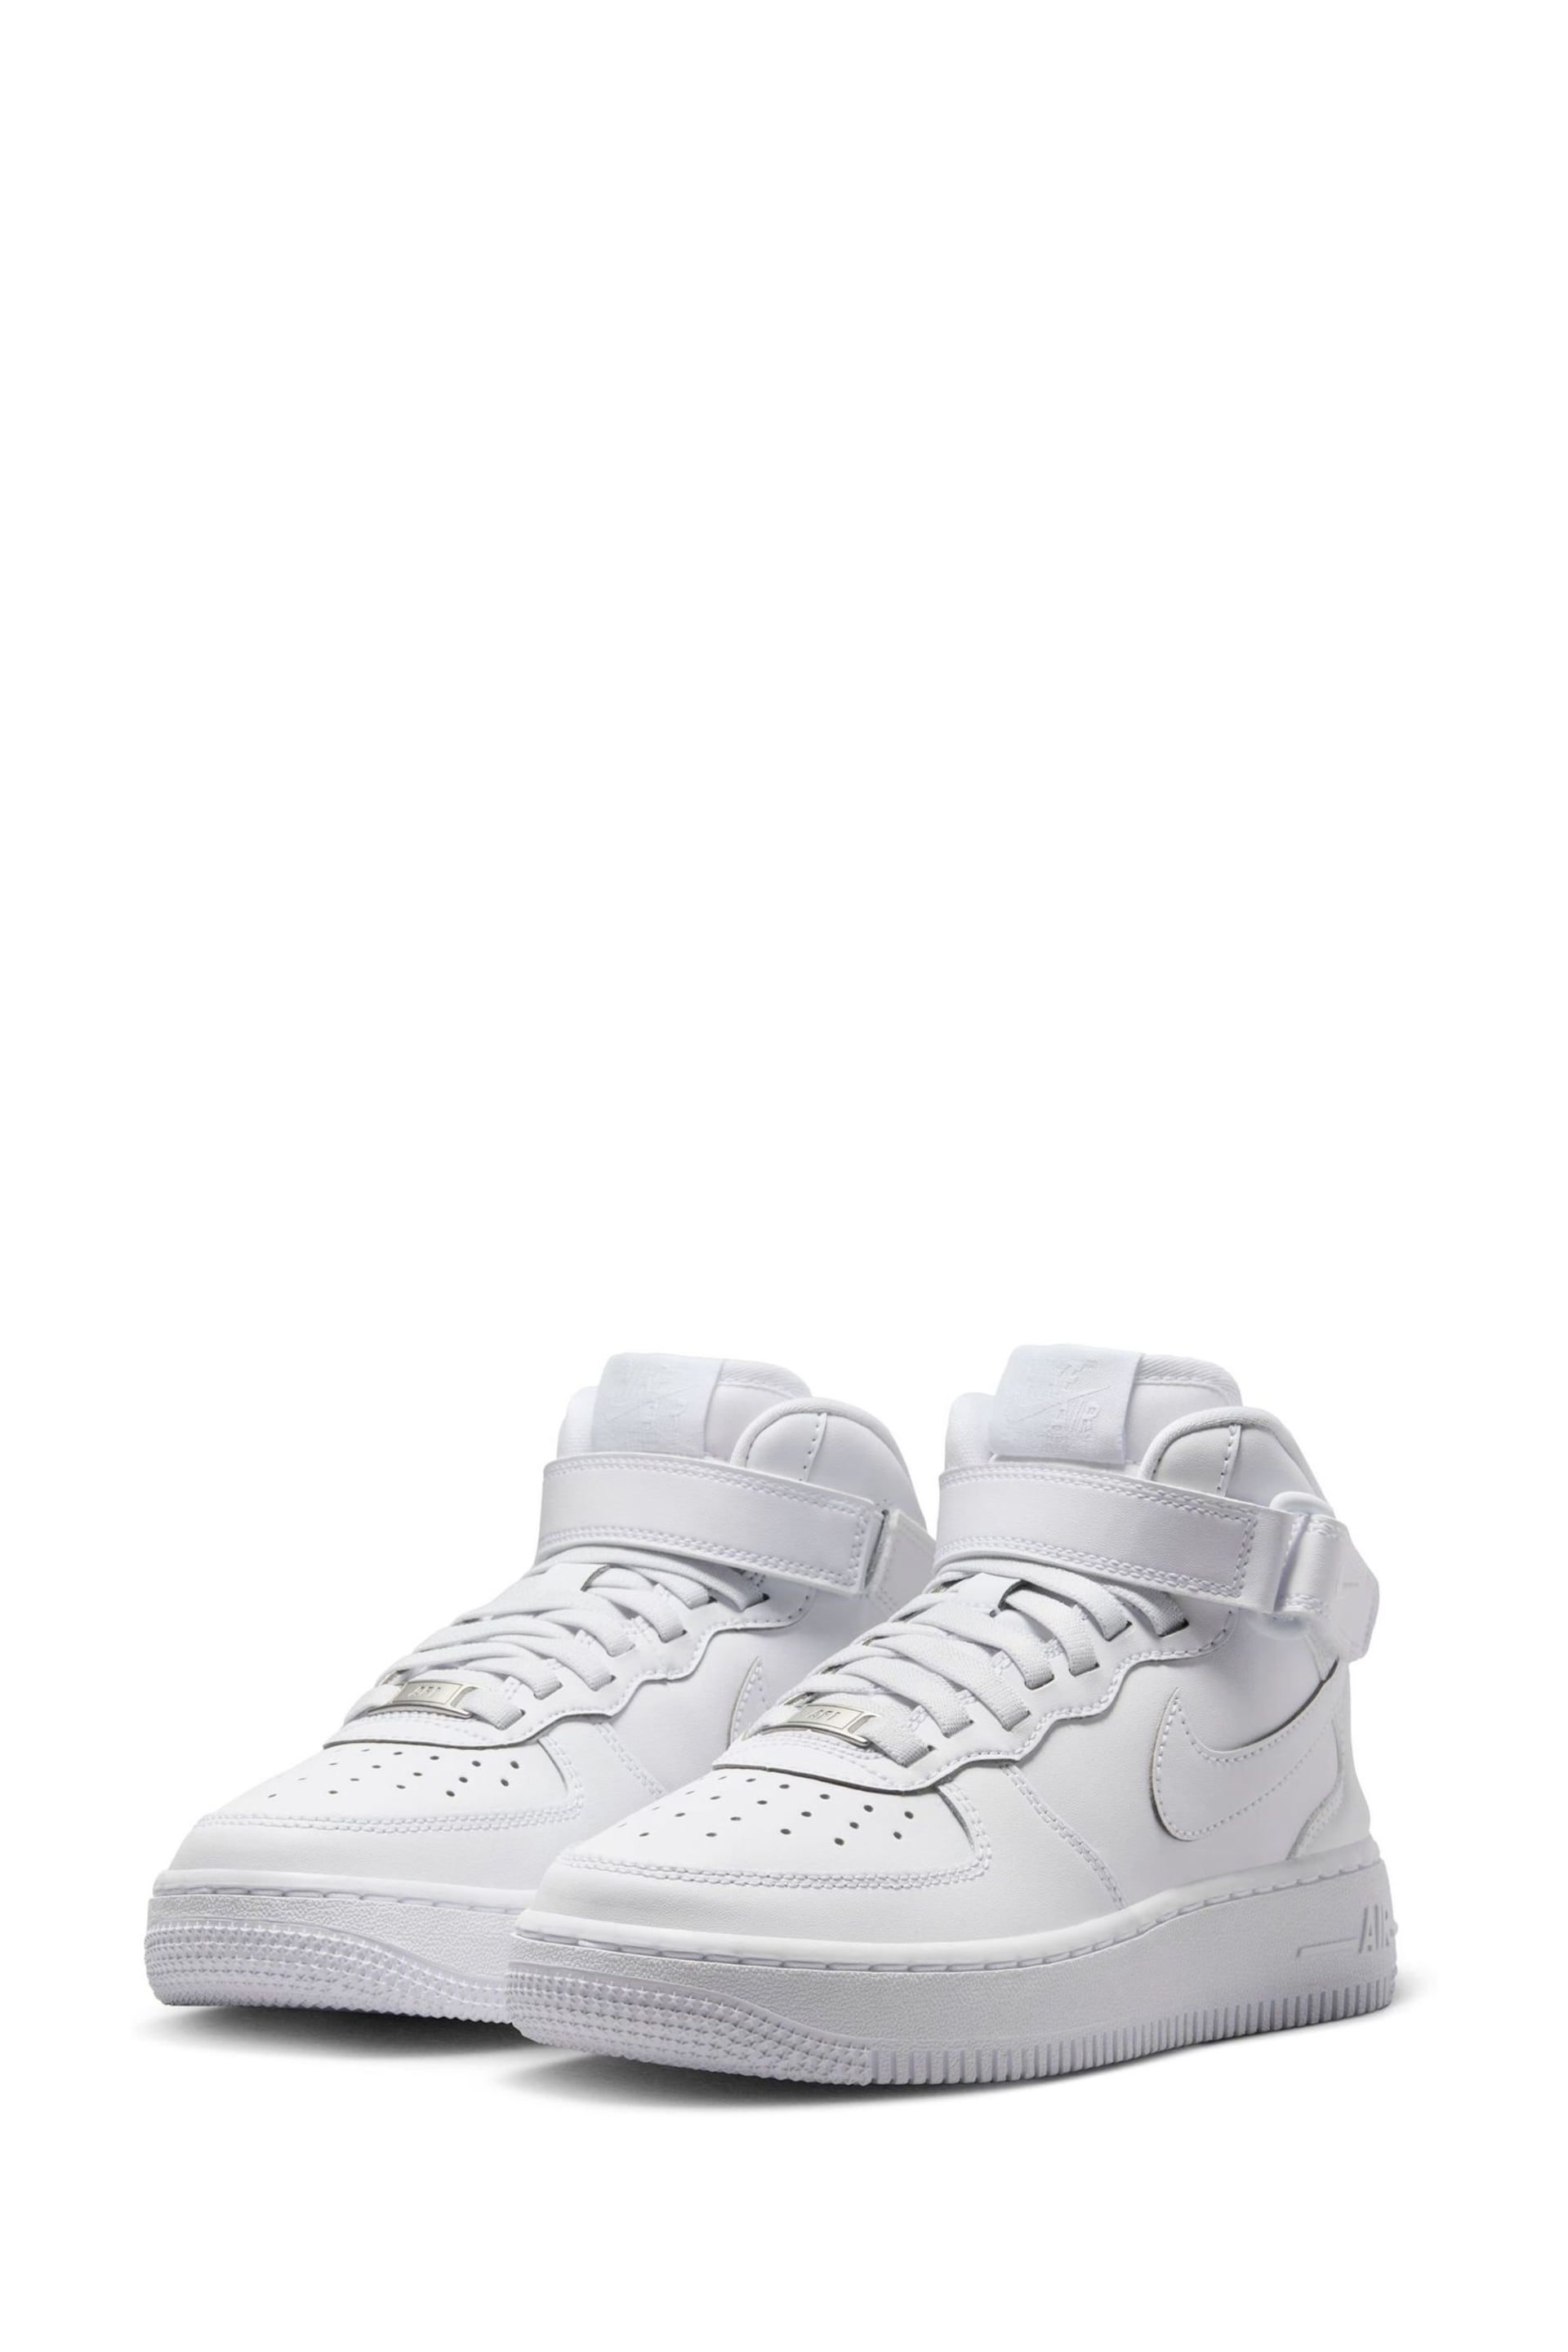 Nike White Youth Air Force 1 Mid EasyOn Trainers - Image 6 of 13